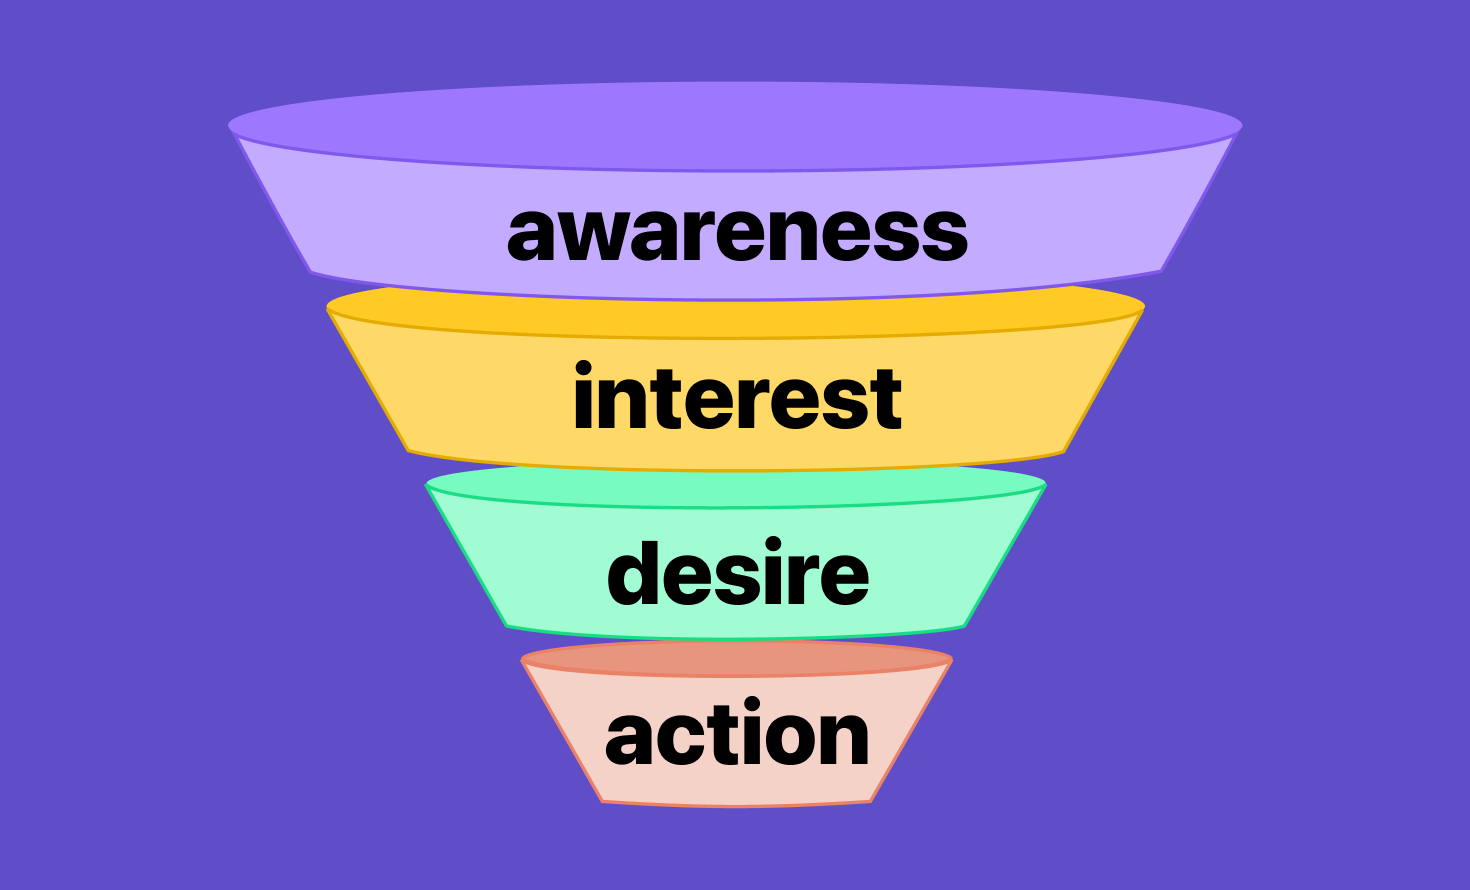 Image of a sales funnel template with awareness, interest, desire, and action as stages